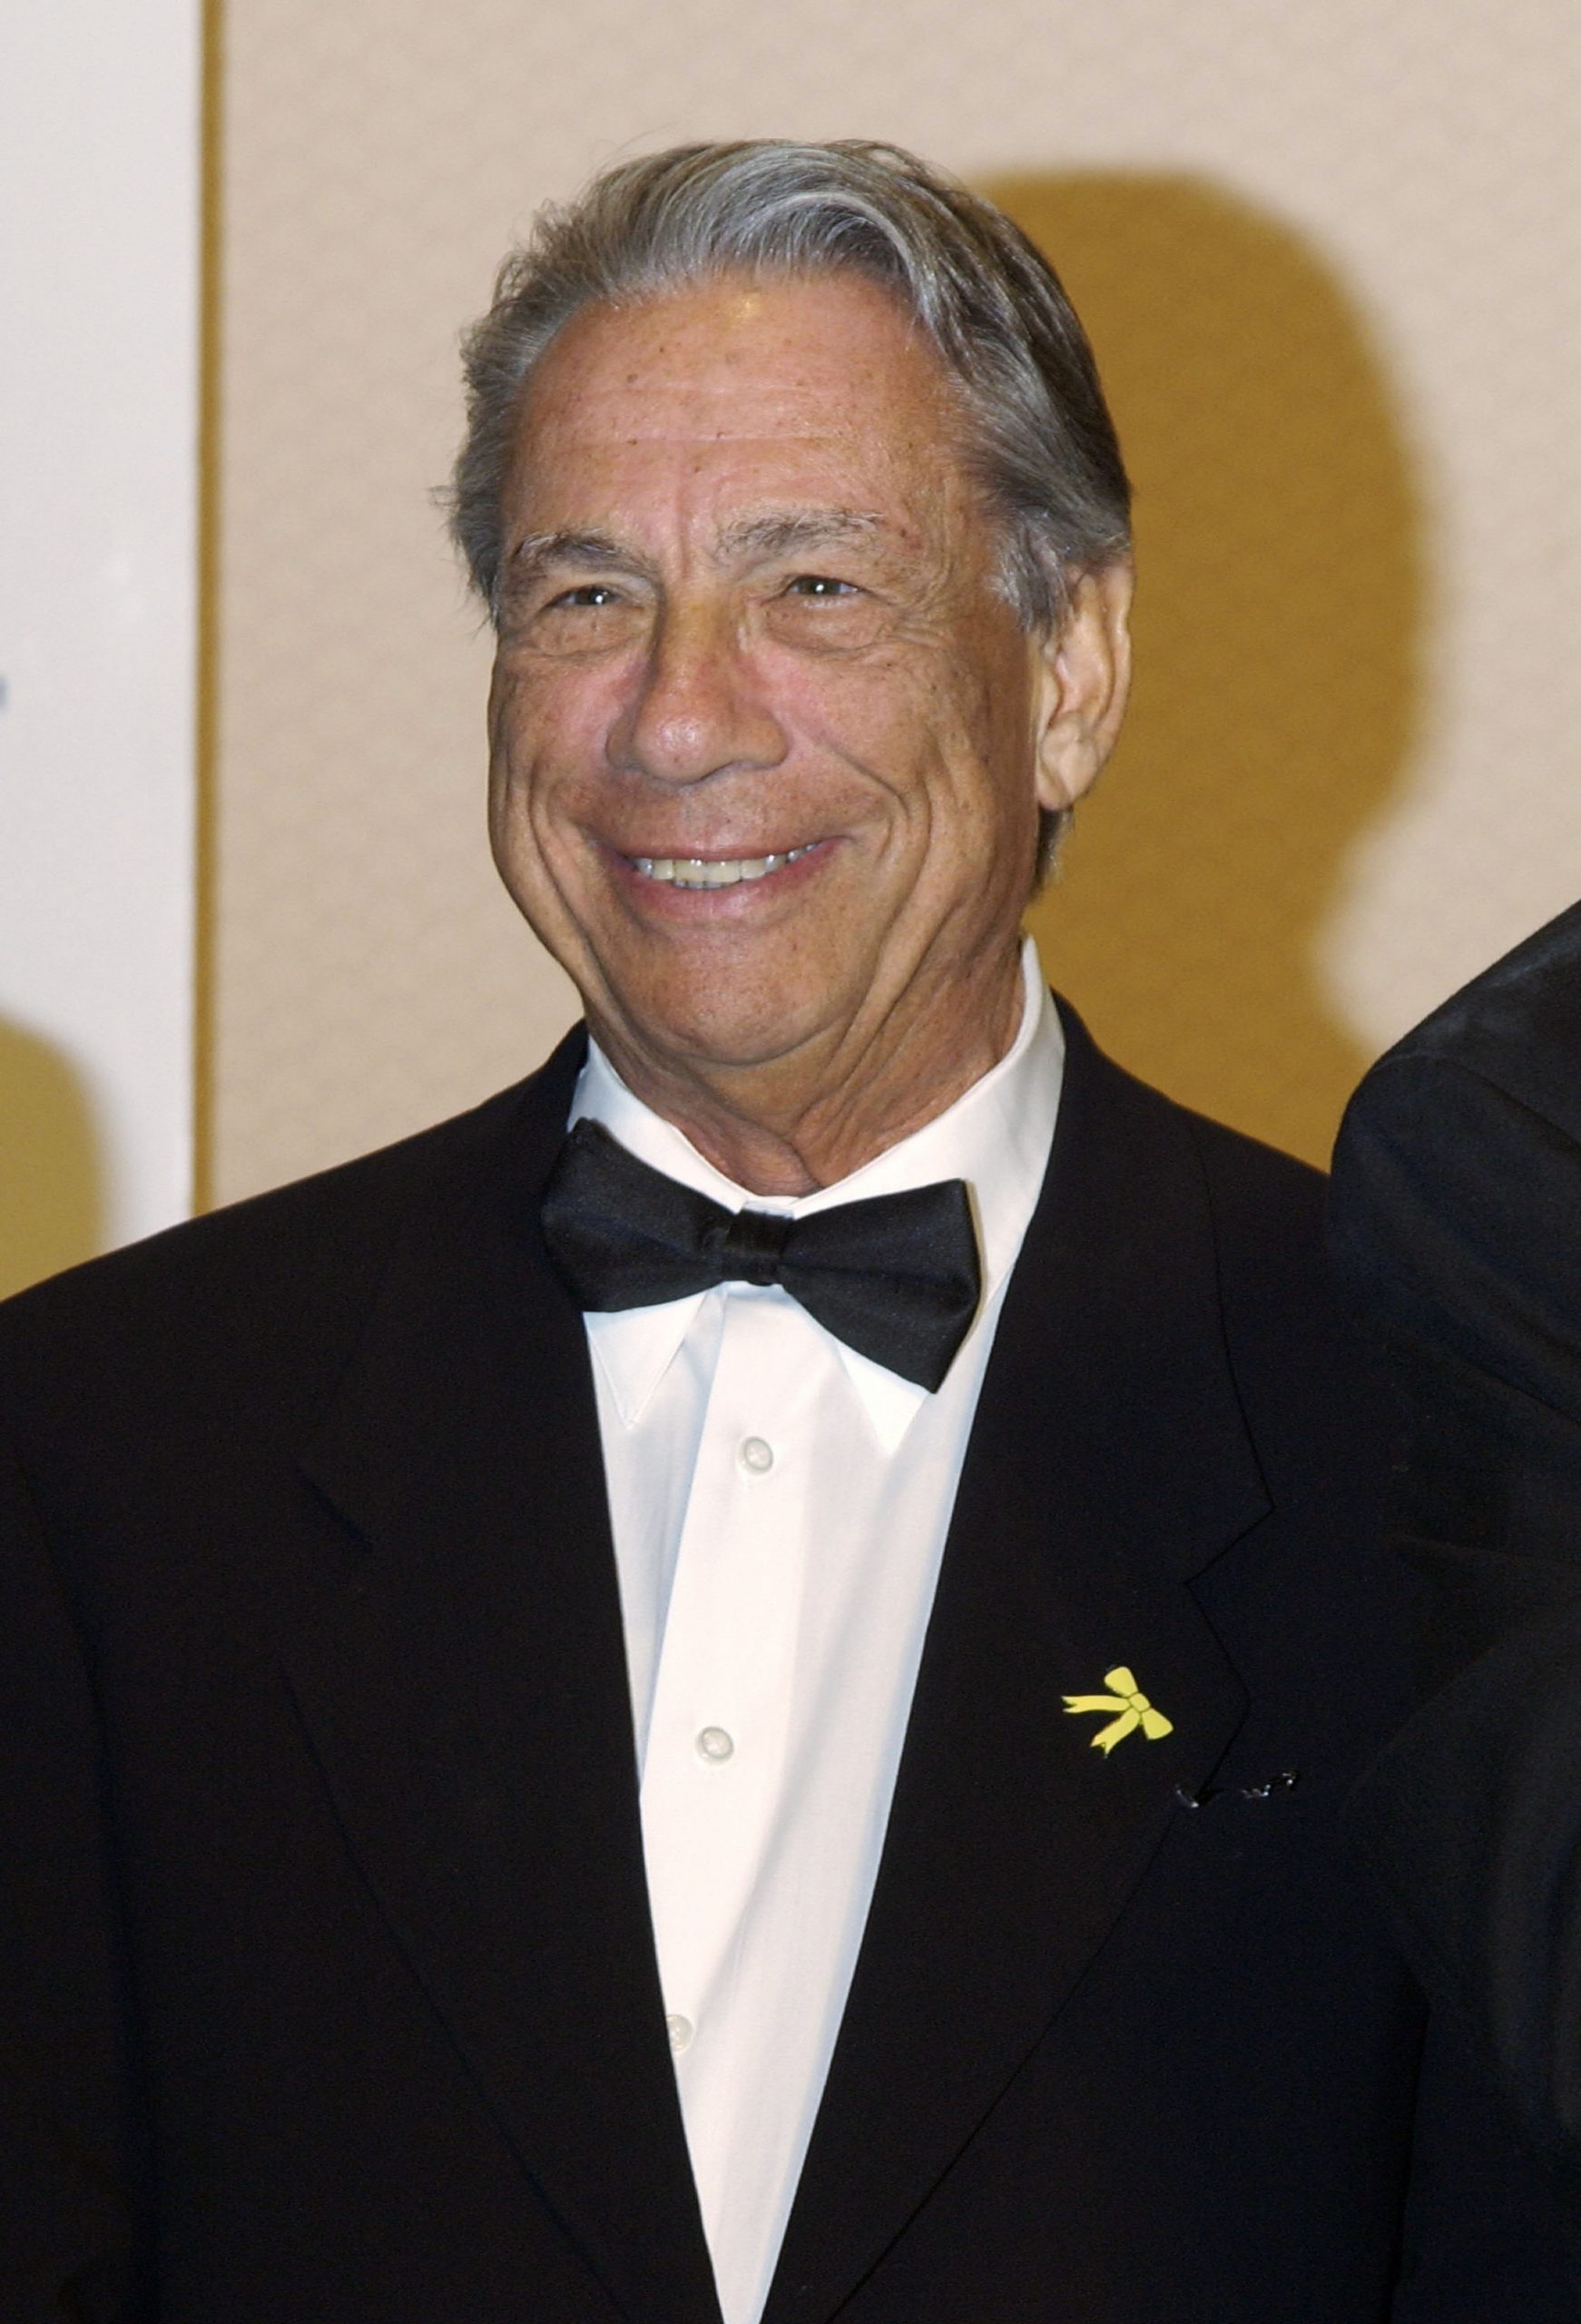 Donald Sterling photo 2